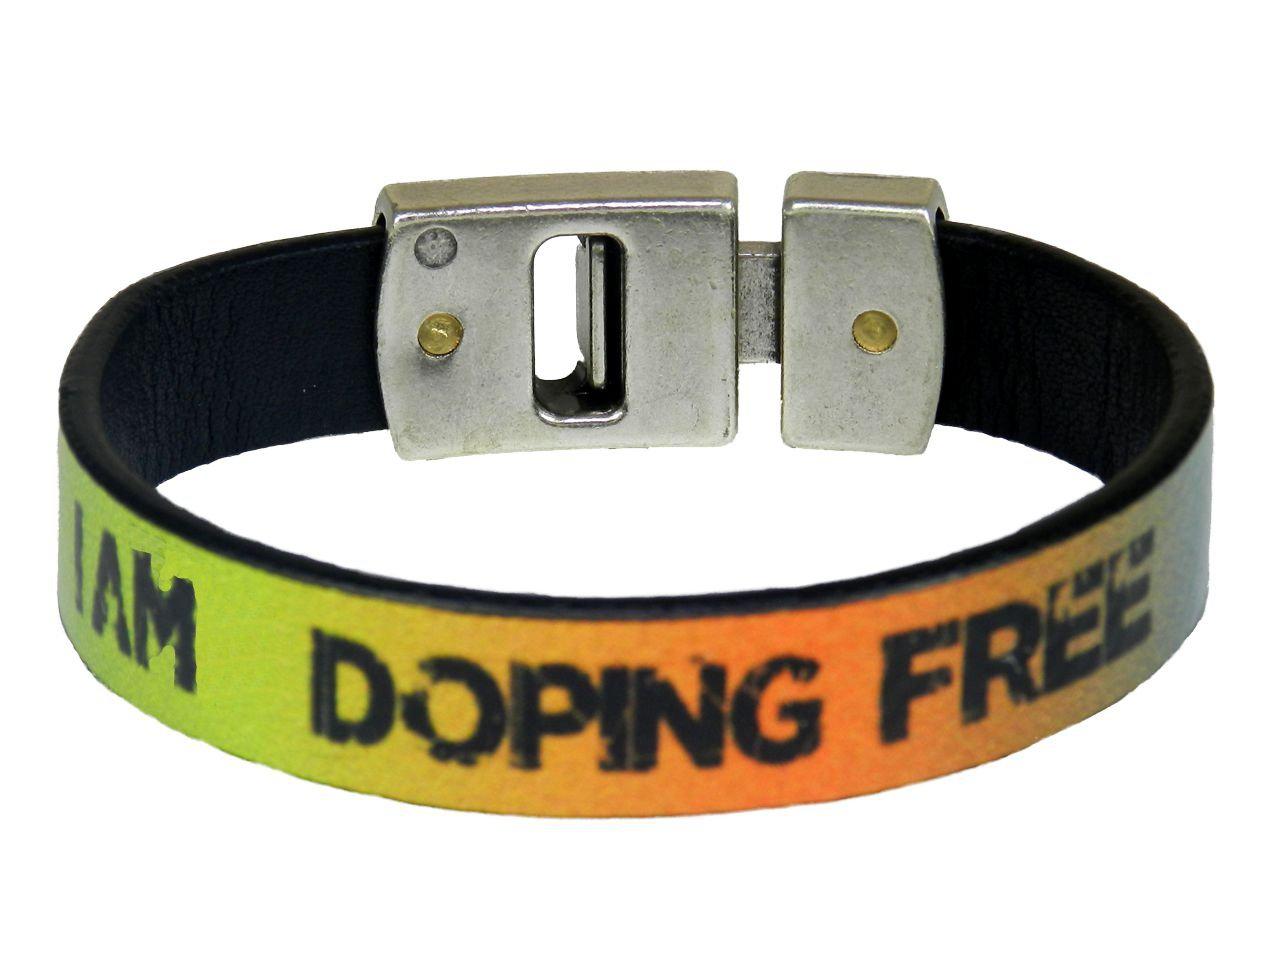 MAN'S BRACELET I AM DOPING FREE BY PAUL MECCANICO MULTICOLOR BLUE GREEN YELLOW ORANGE - Limited Edition Paul Meccanico